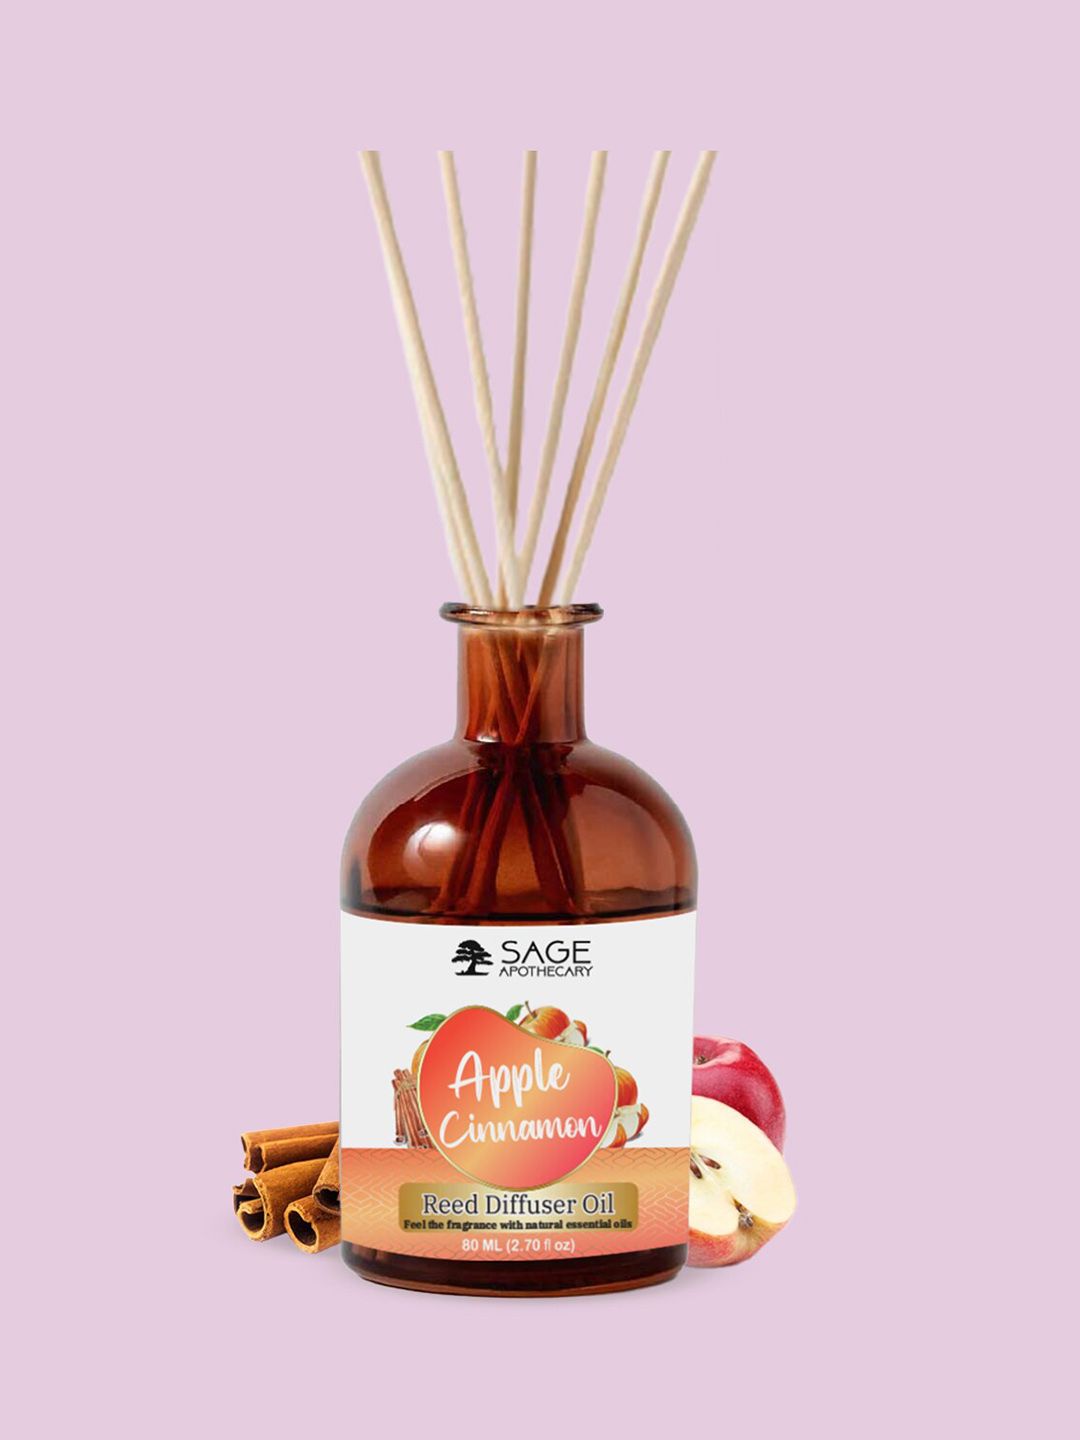 SAGE APOTHECARY Apple Cinnamon Reed Diffuser Oil - 80ml Price in India